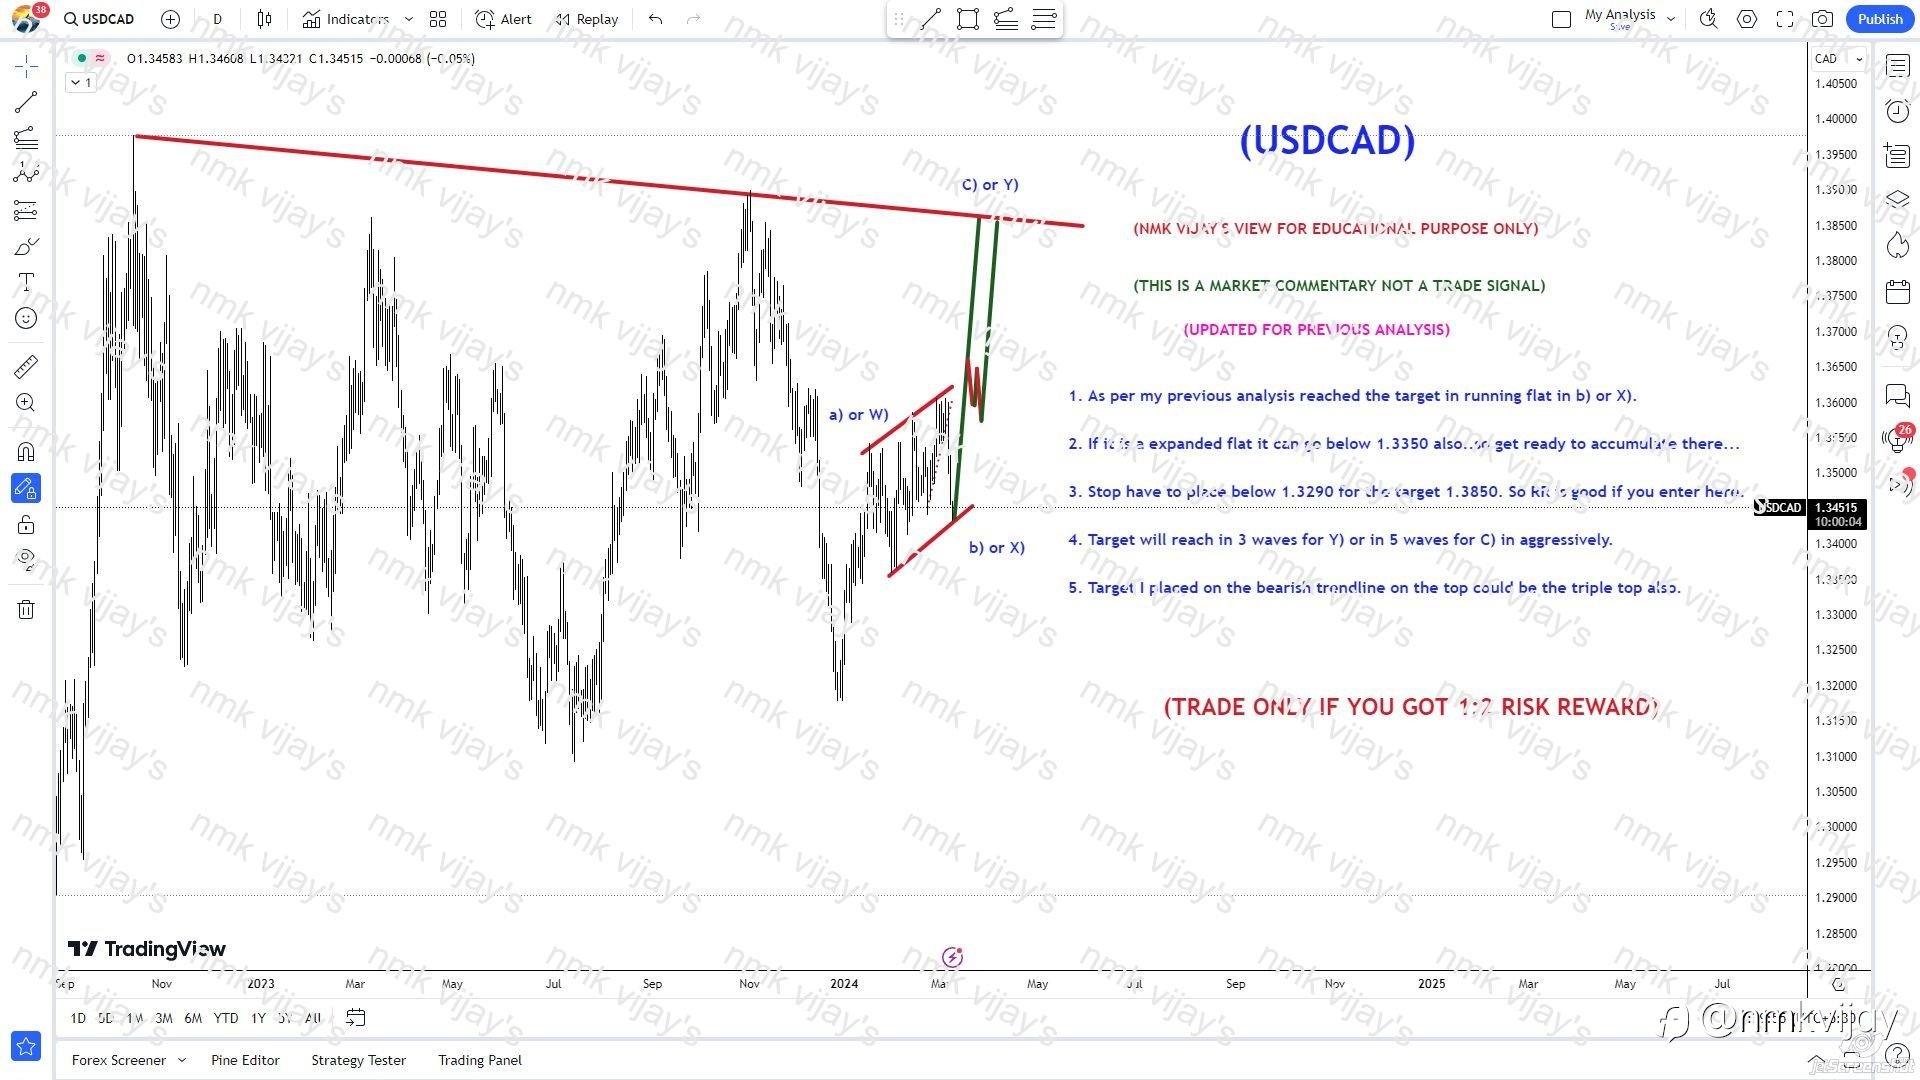 USDCAD: Target 1.3850. Sell target reached in running flat.